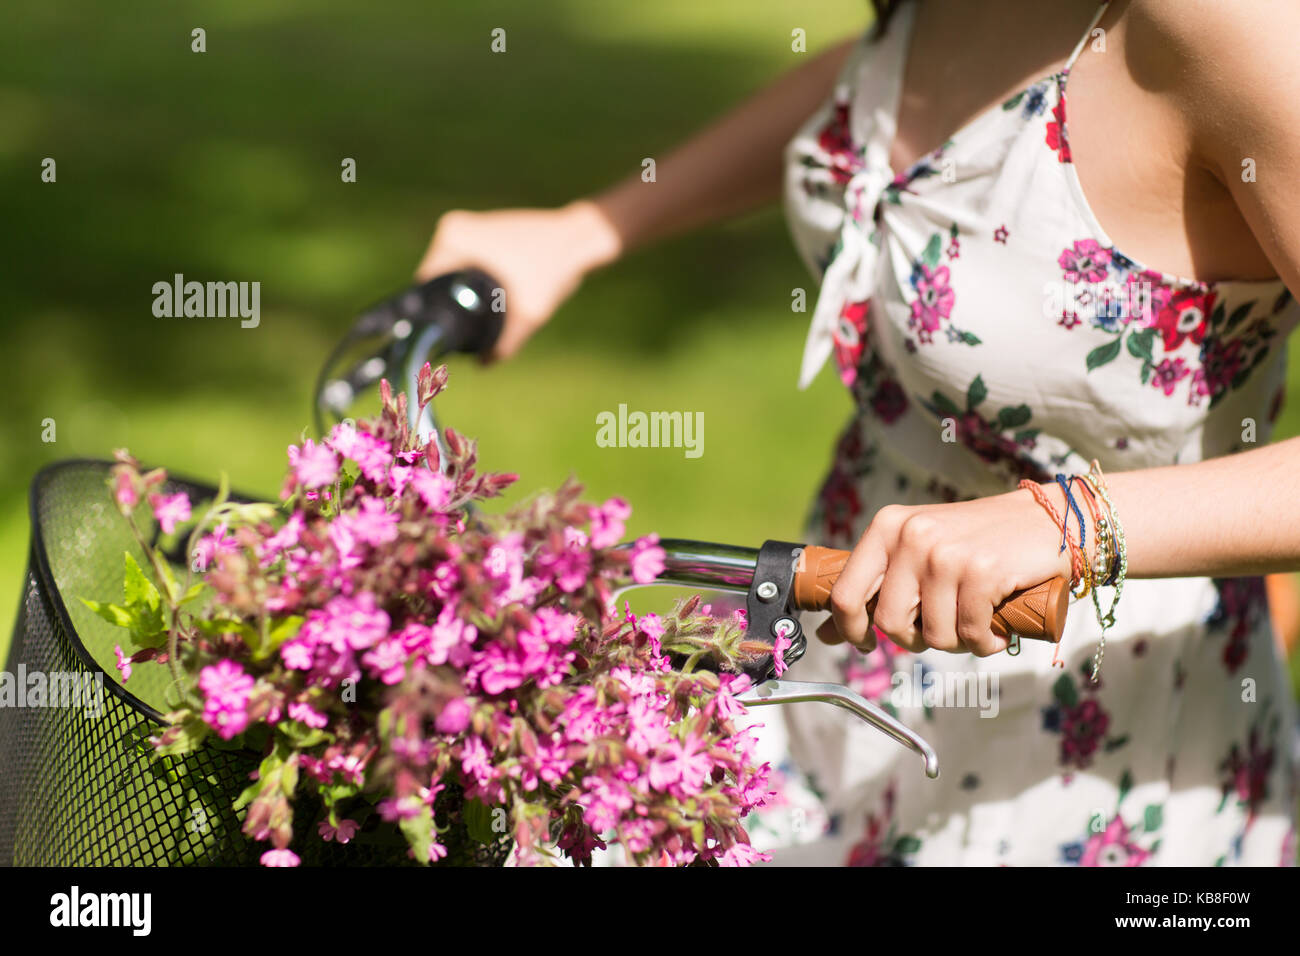 close up of woman riding fixie bicycle outdoors Stock Photo